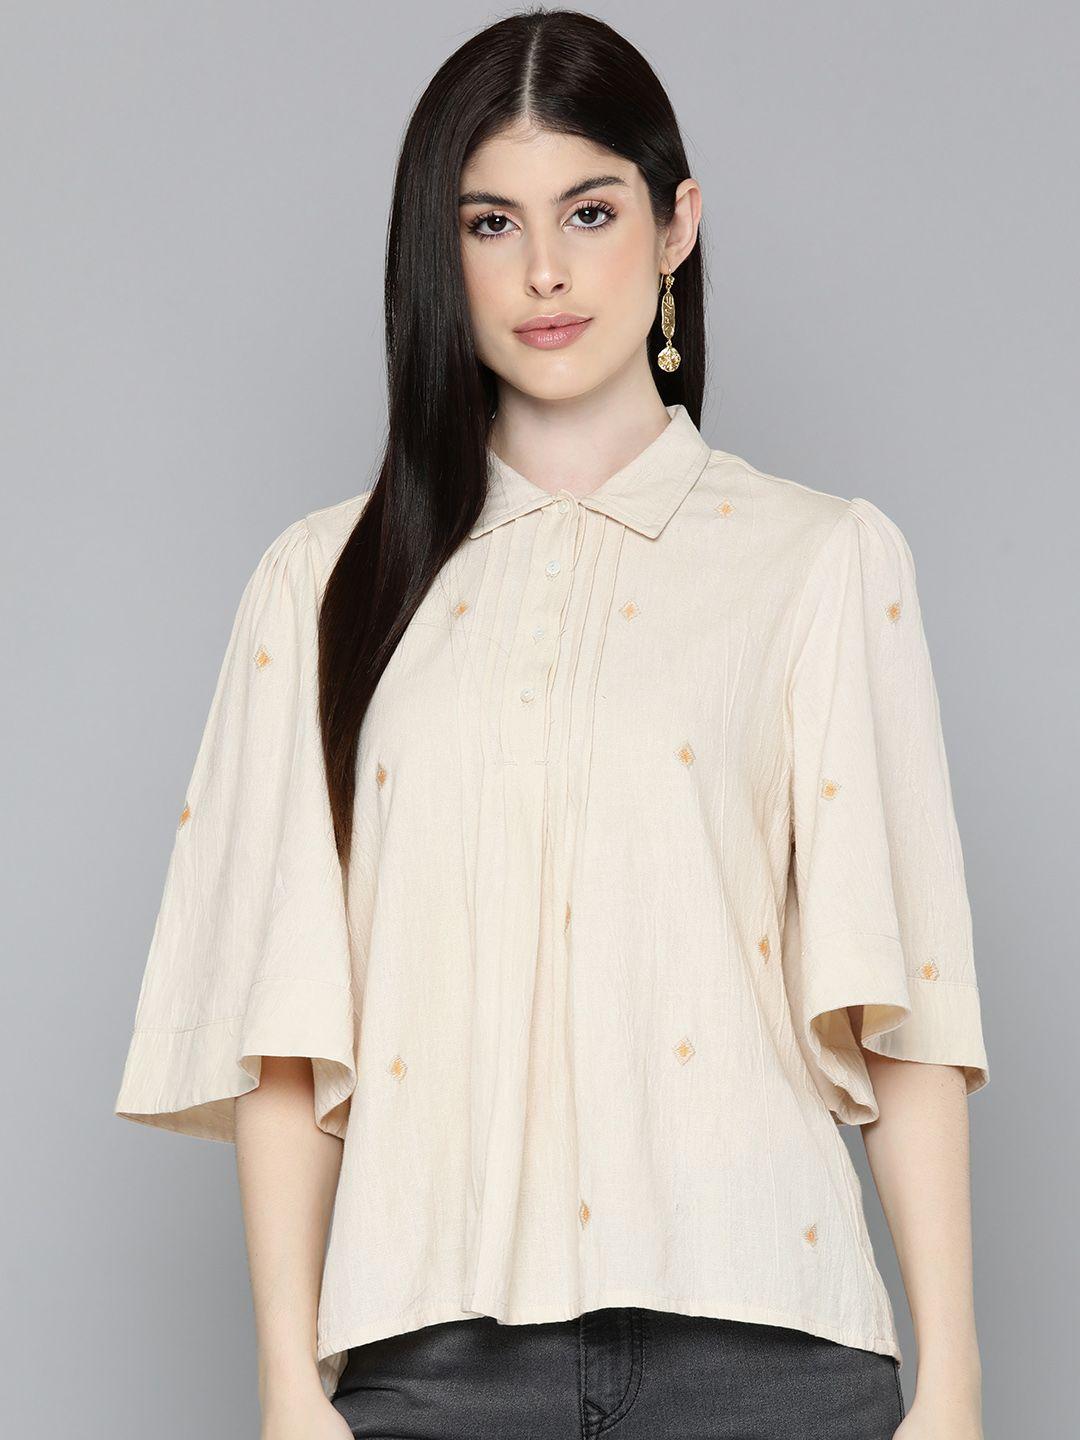 scoup geometric embroidered flared sleeve cotton shirt style top